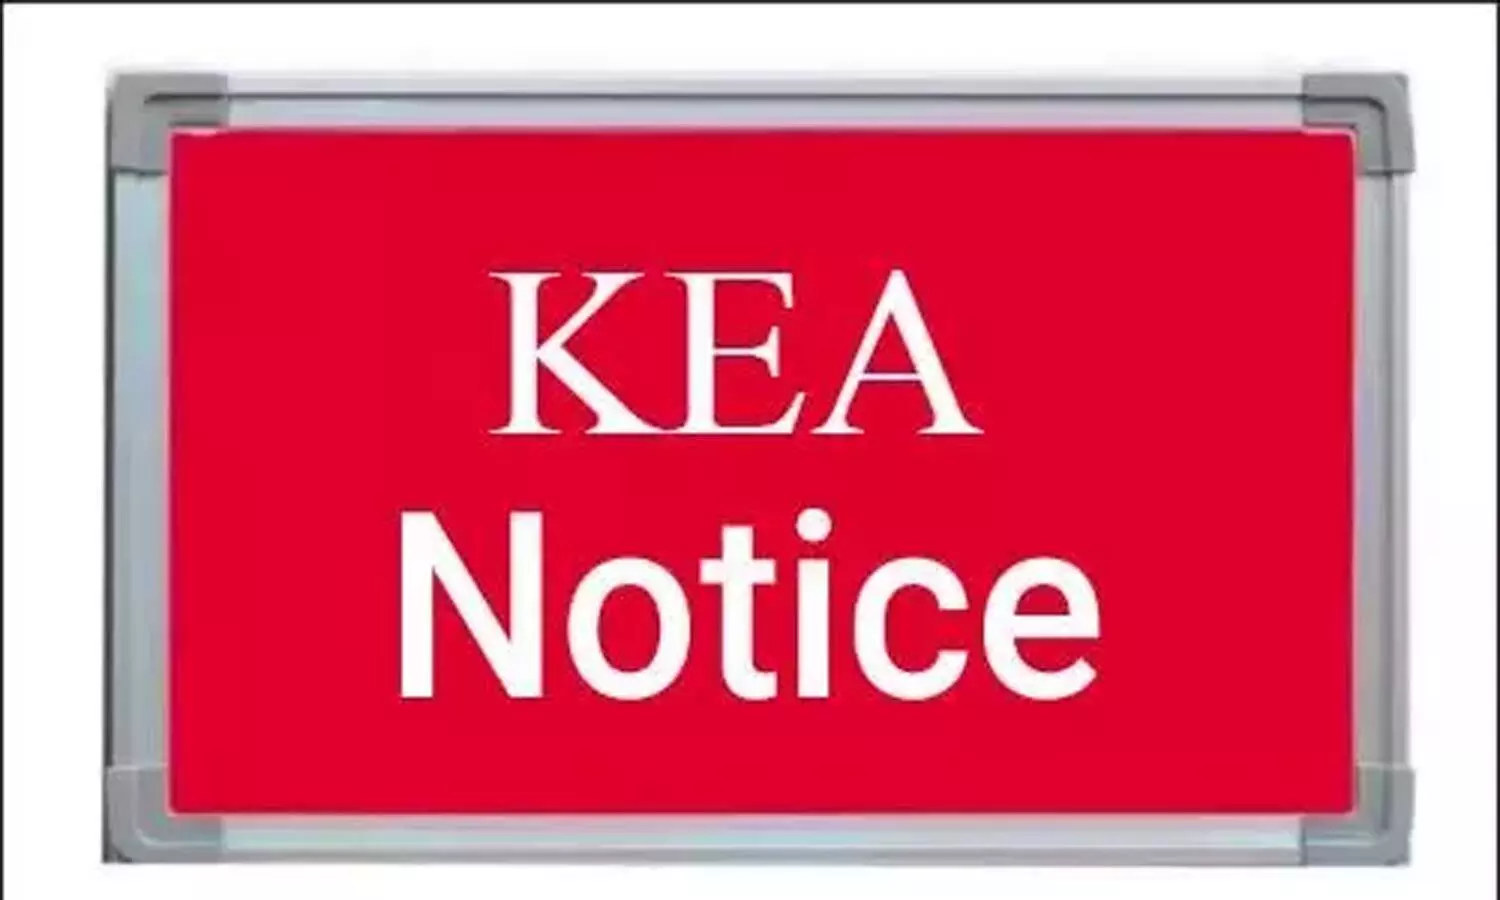 MBBS Admissions in Karnataka: KEA releases instructions for option entry